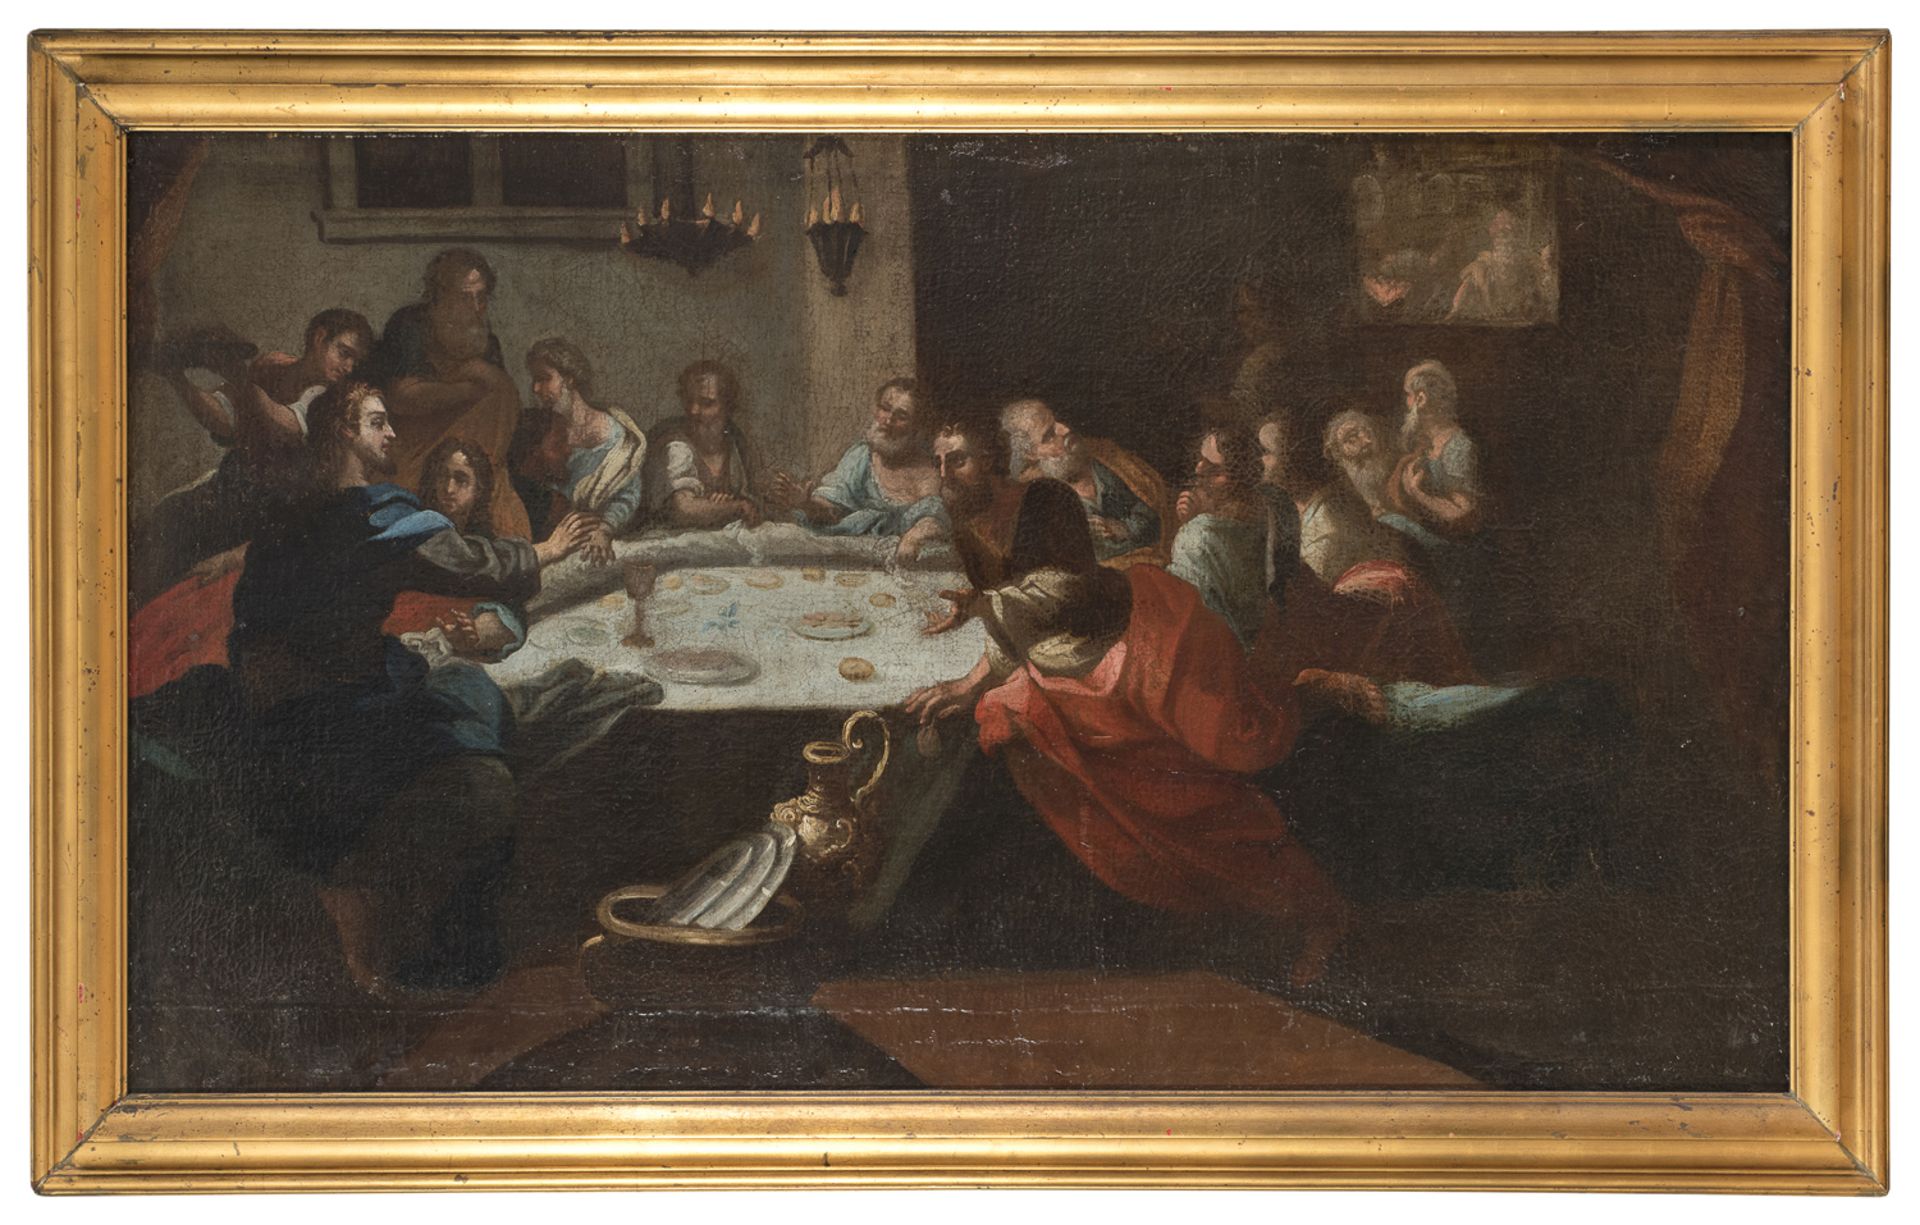 NEAPOLITAN OIL PAINTING OF THE LAST SUPPER 17TH CENTURY